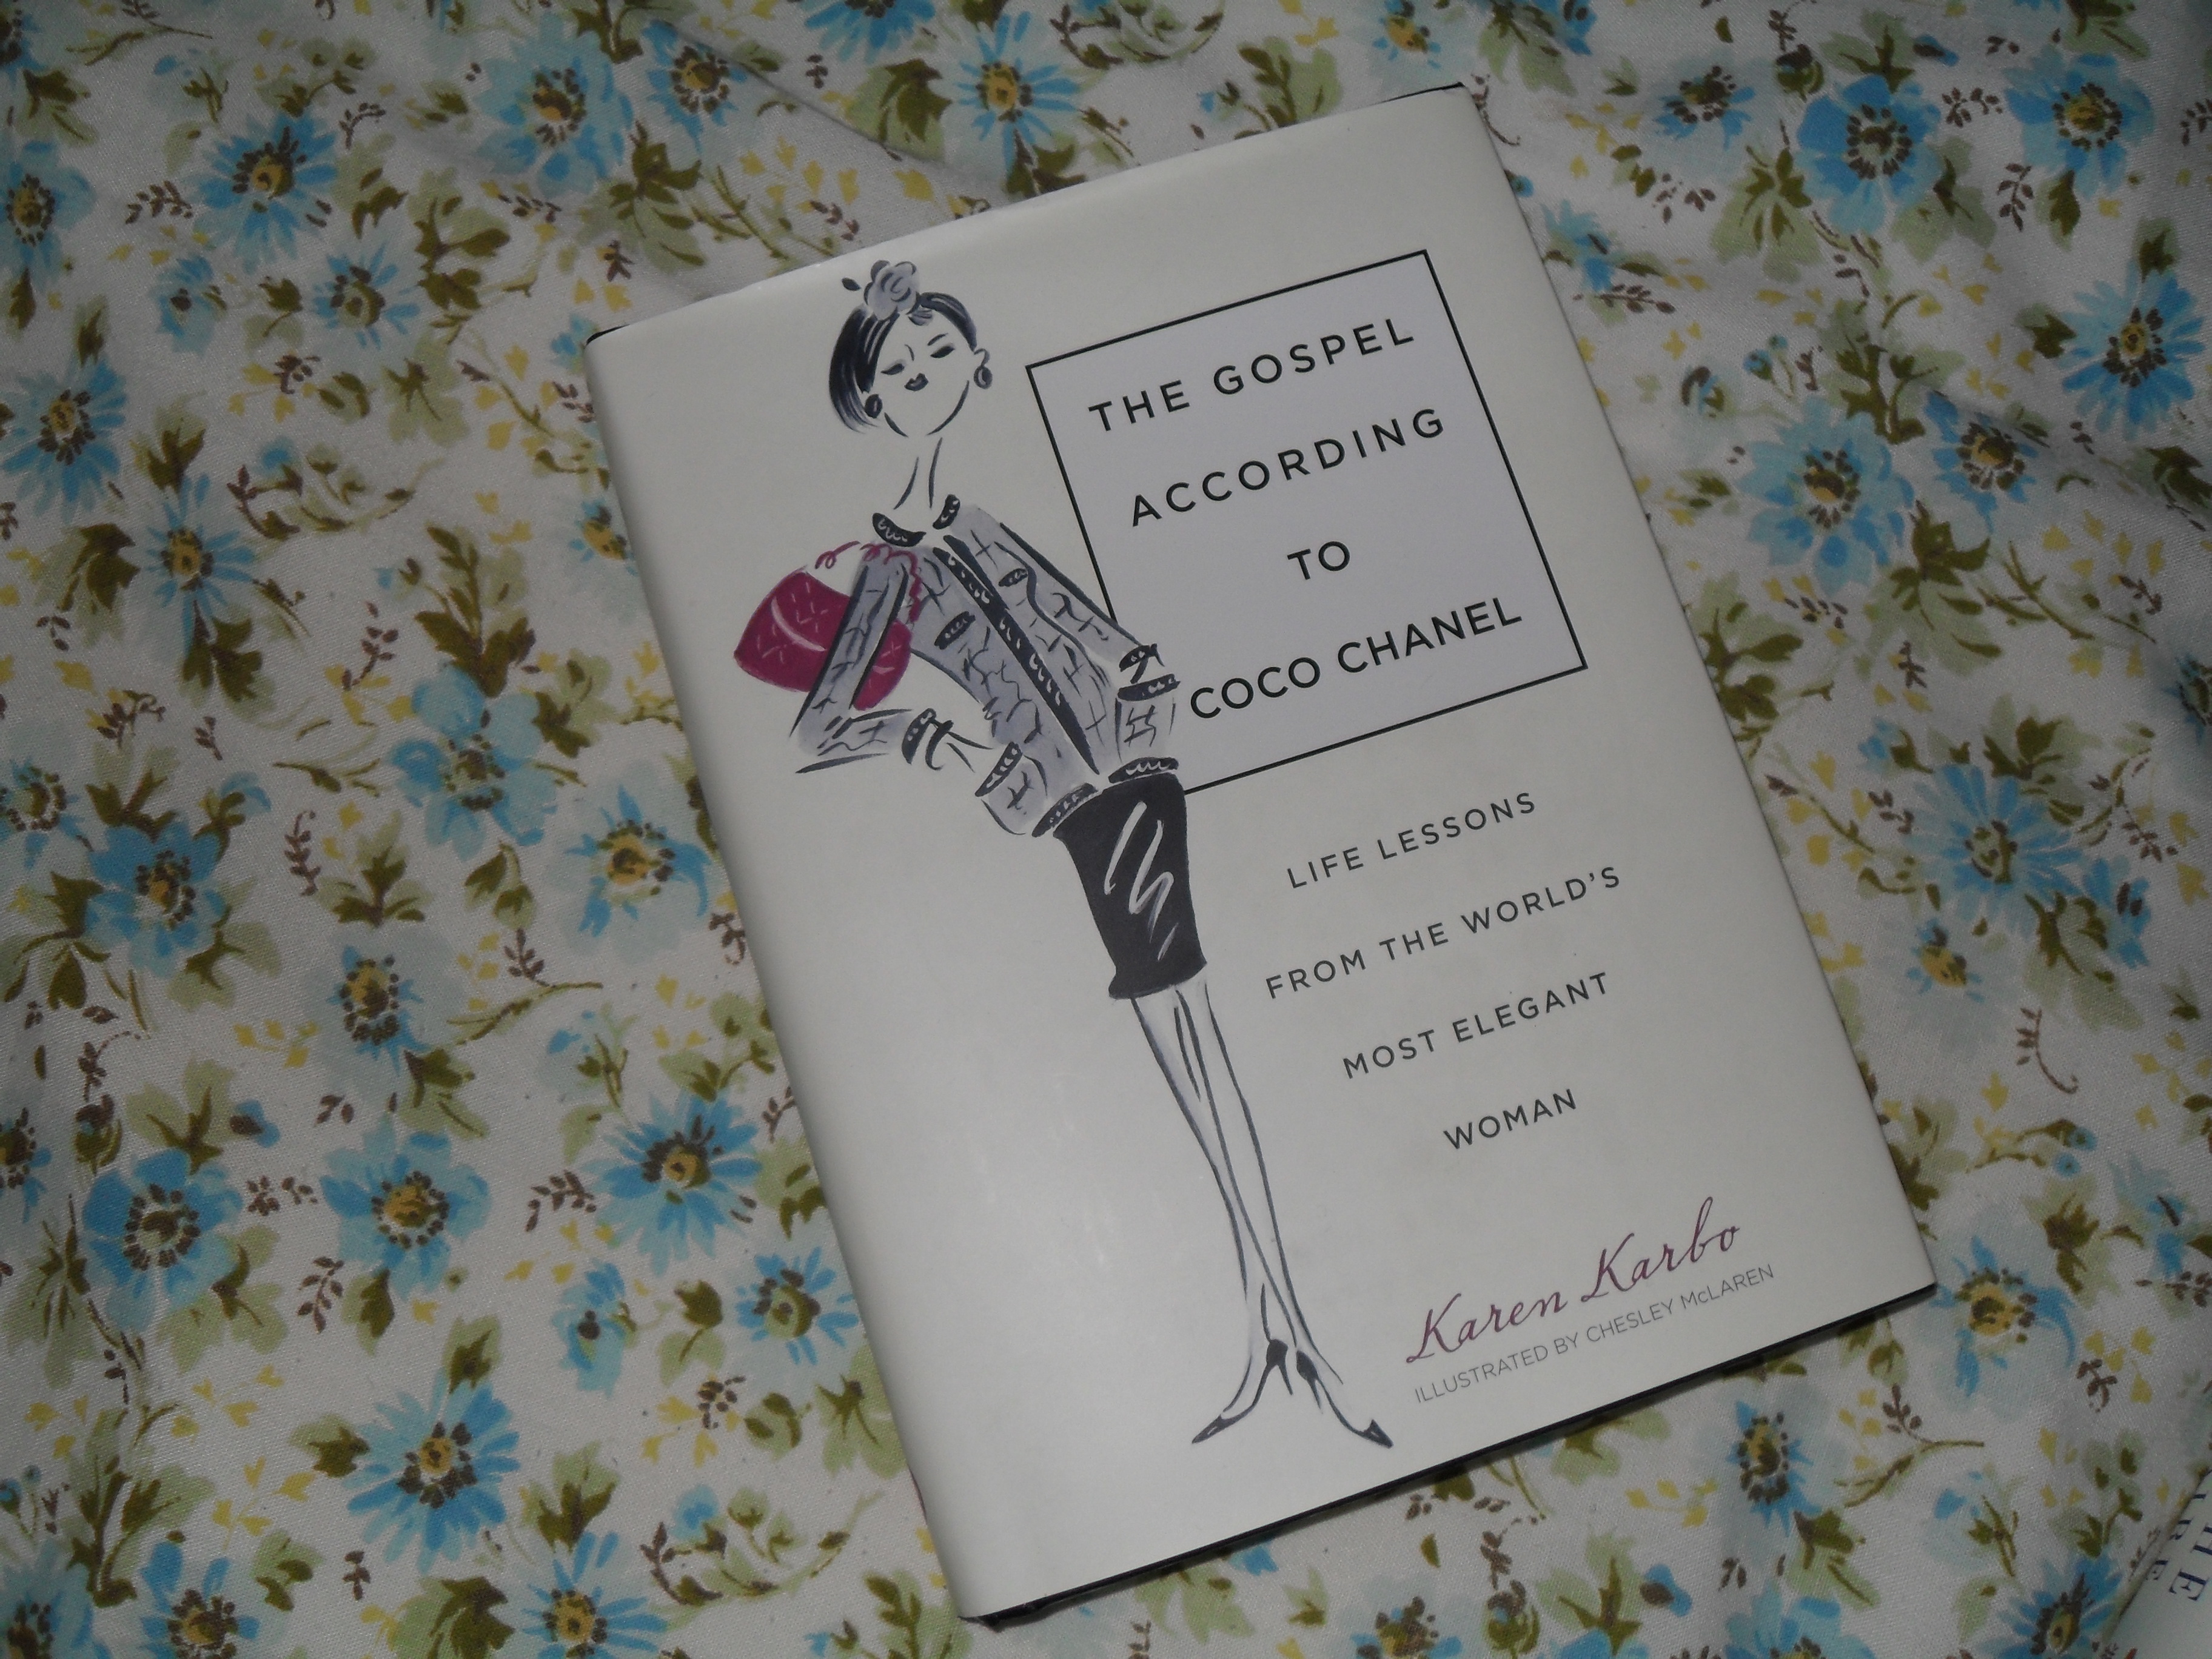 The Gospel According to Coco Chanel by Karen Karbo, Illustrated by  Chesley Mc Laren